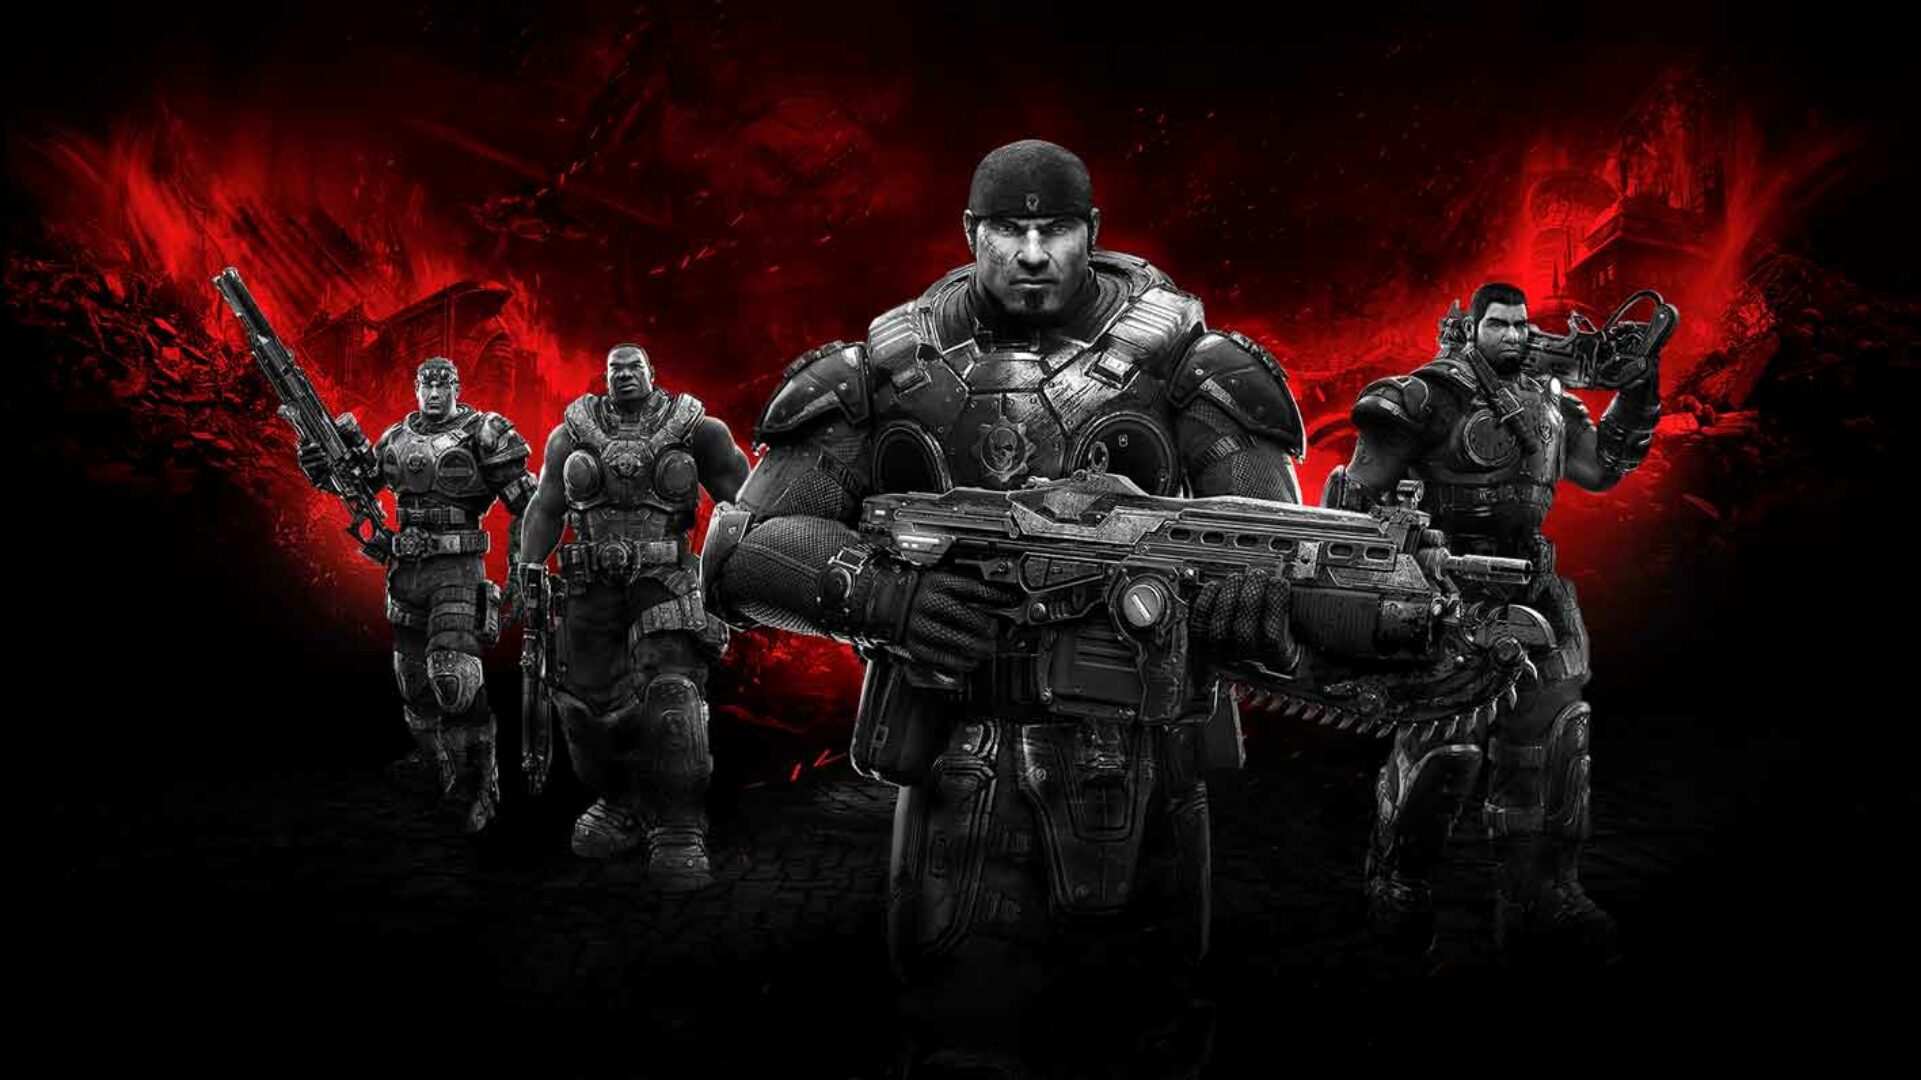 Available Now! Gears of War: Ultimate Edition on Windows 10